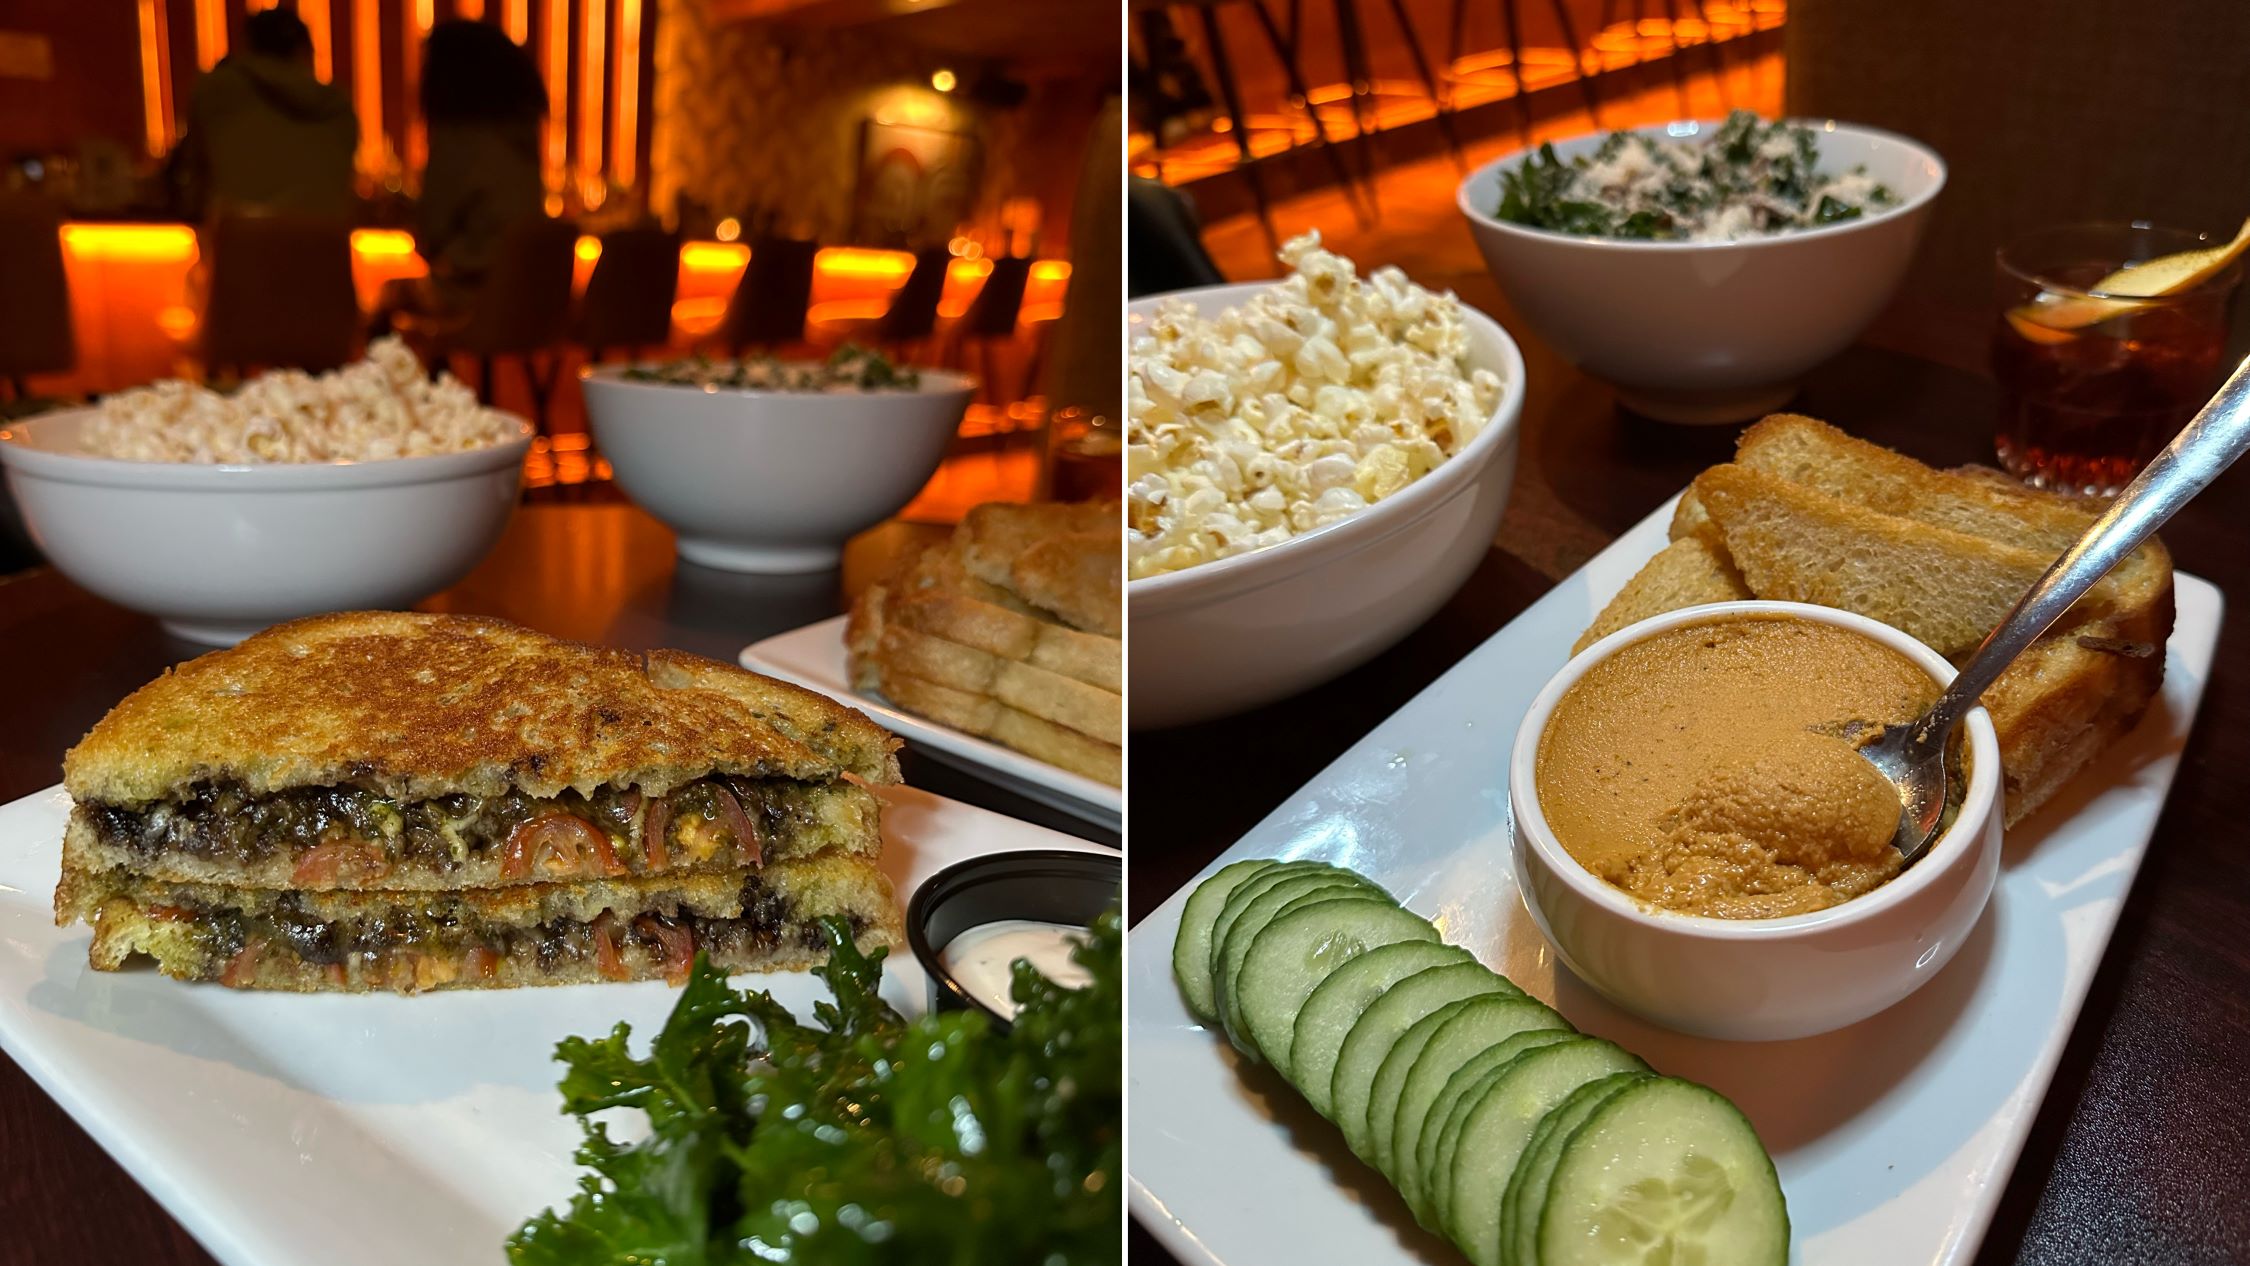 An image of the food at Blind Barber Highland Park: grilled cheese, robust hummus, savory truffle popcorn, and hearty salads.